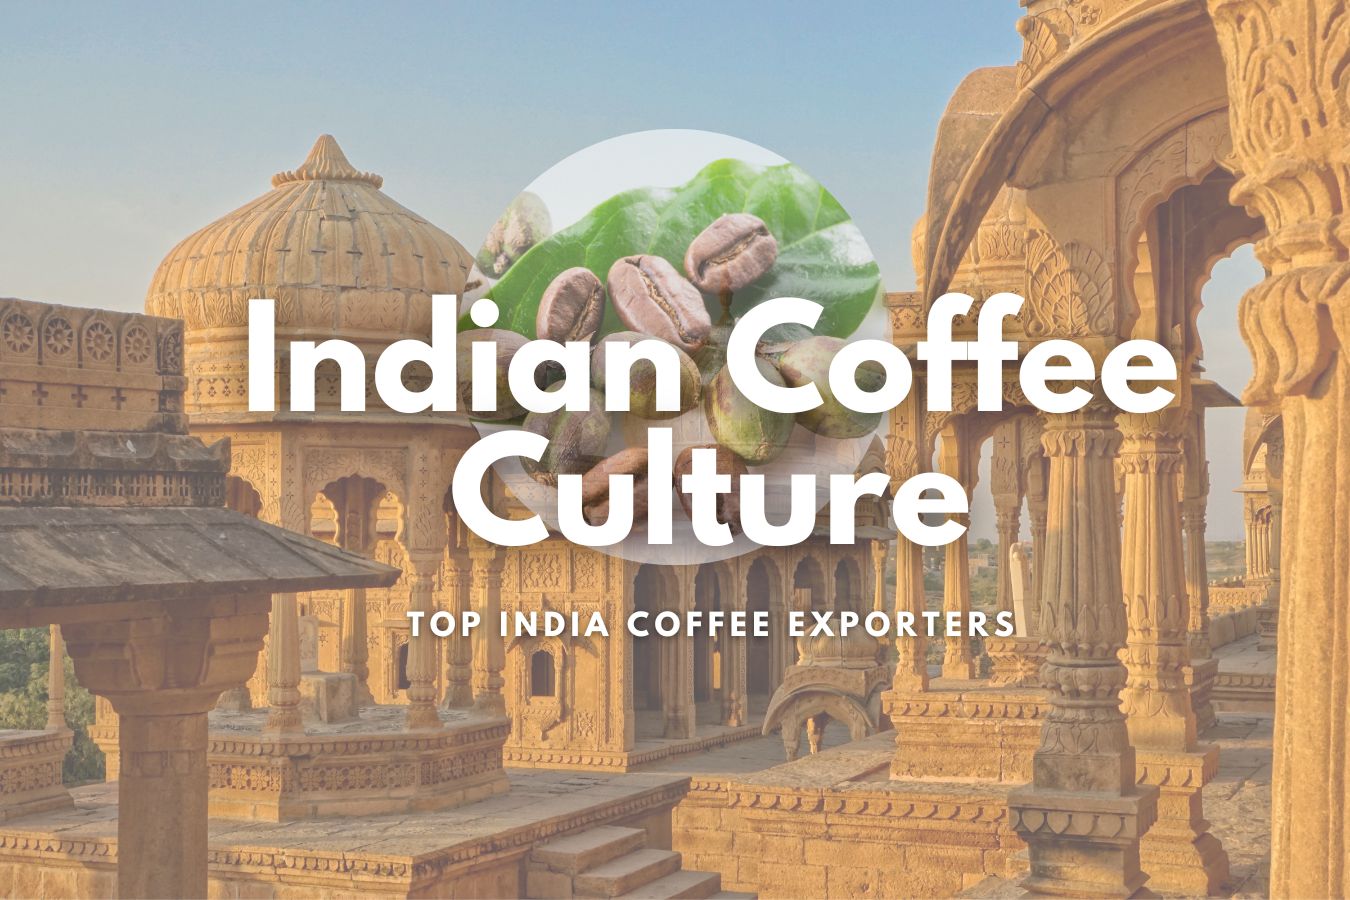 Discovering the Richness of Indian Coffee Culture and the Top India Coffee Exporters